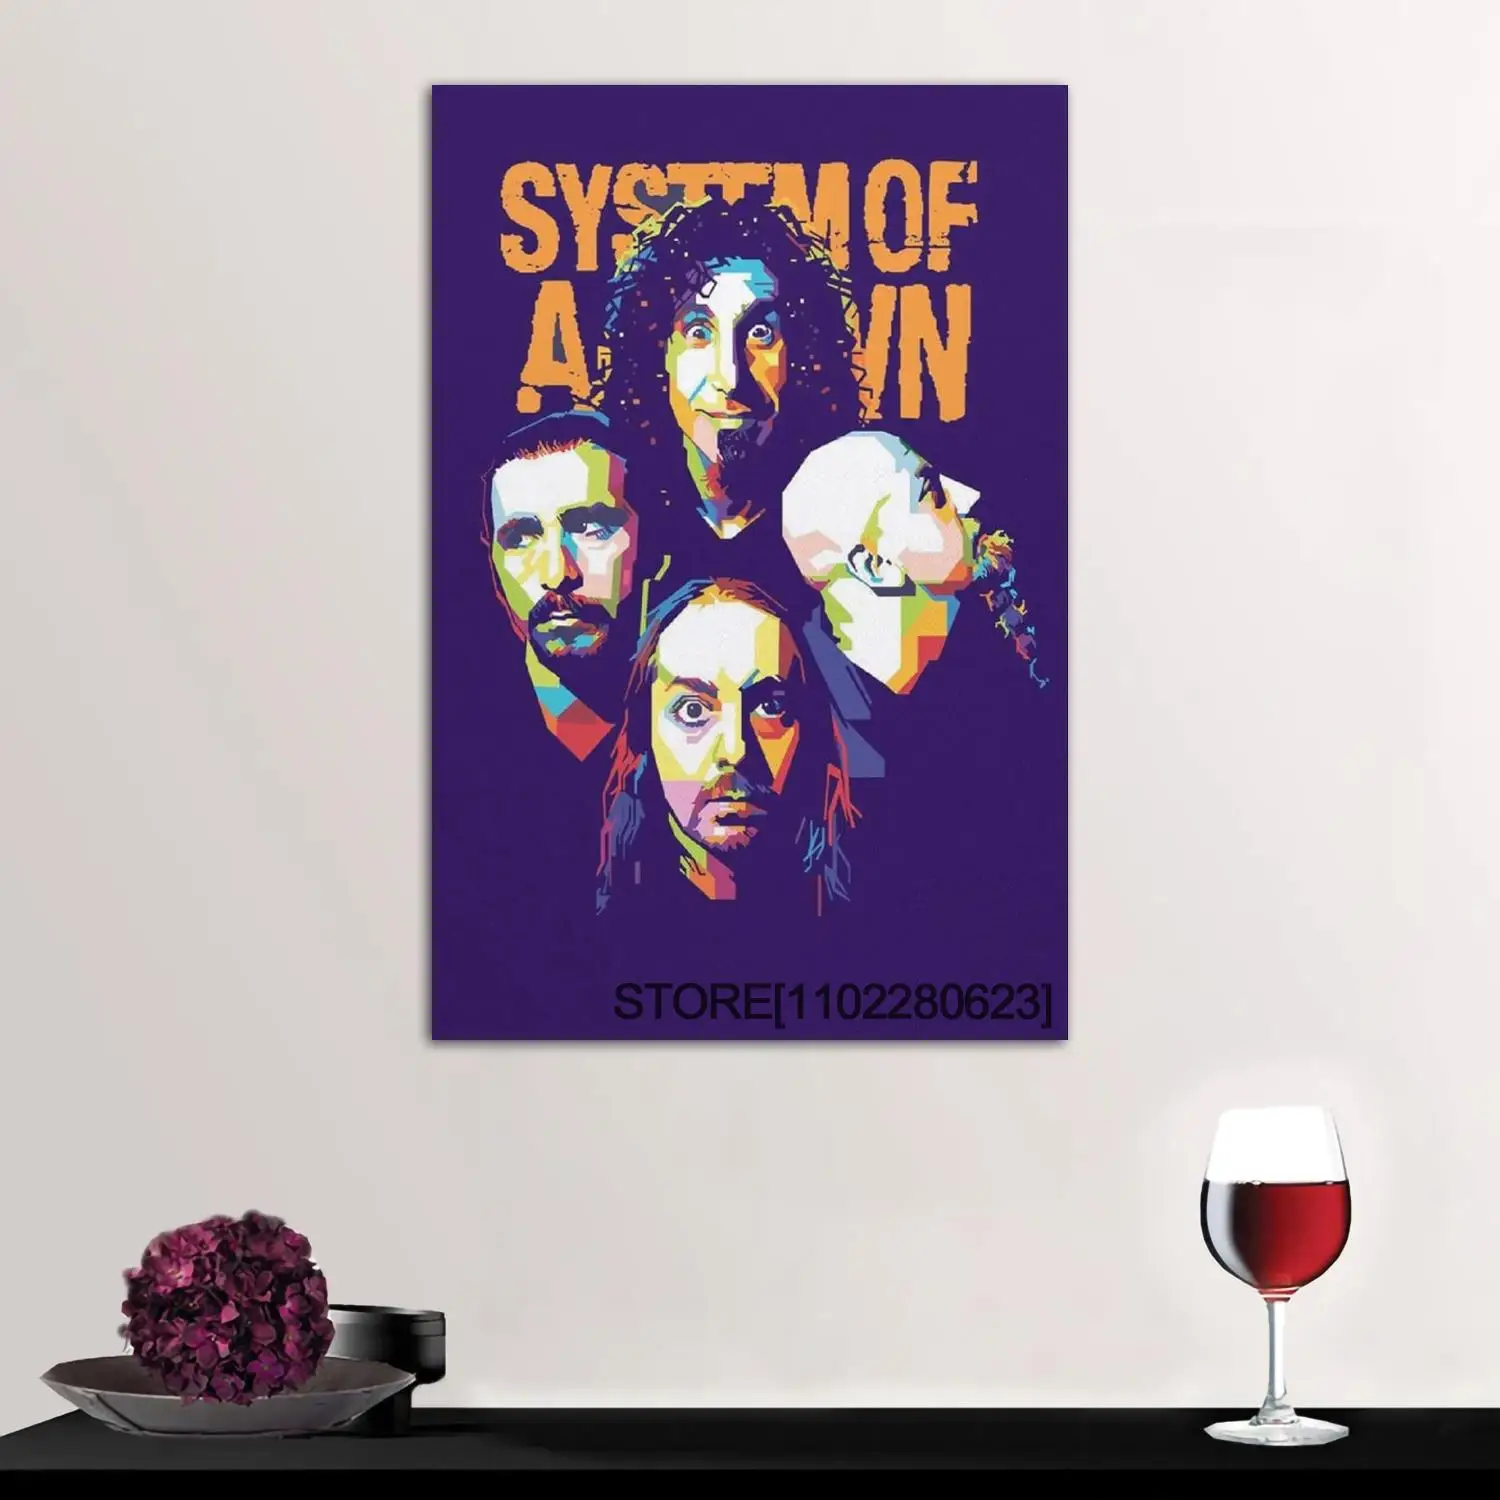  HONGWEIBAO System of A Down 1998 by System of A Down Poster  Canvas Poster Wall Art Decor Print Picture Paintings for Living Room  Bedroom Decoration Unframe-style112x18inch(30x45cm): Posters & Prints